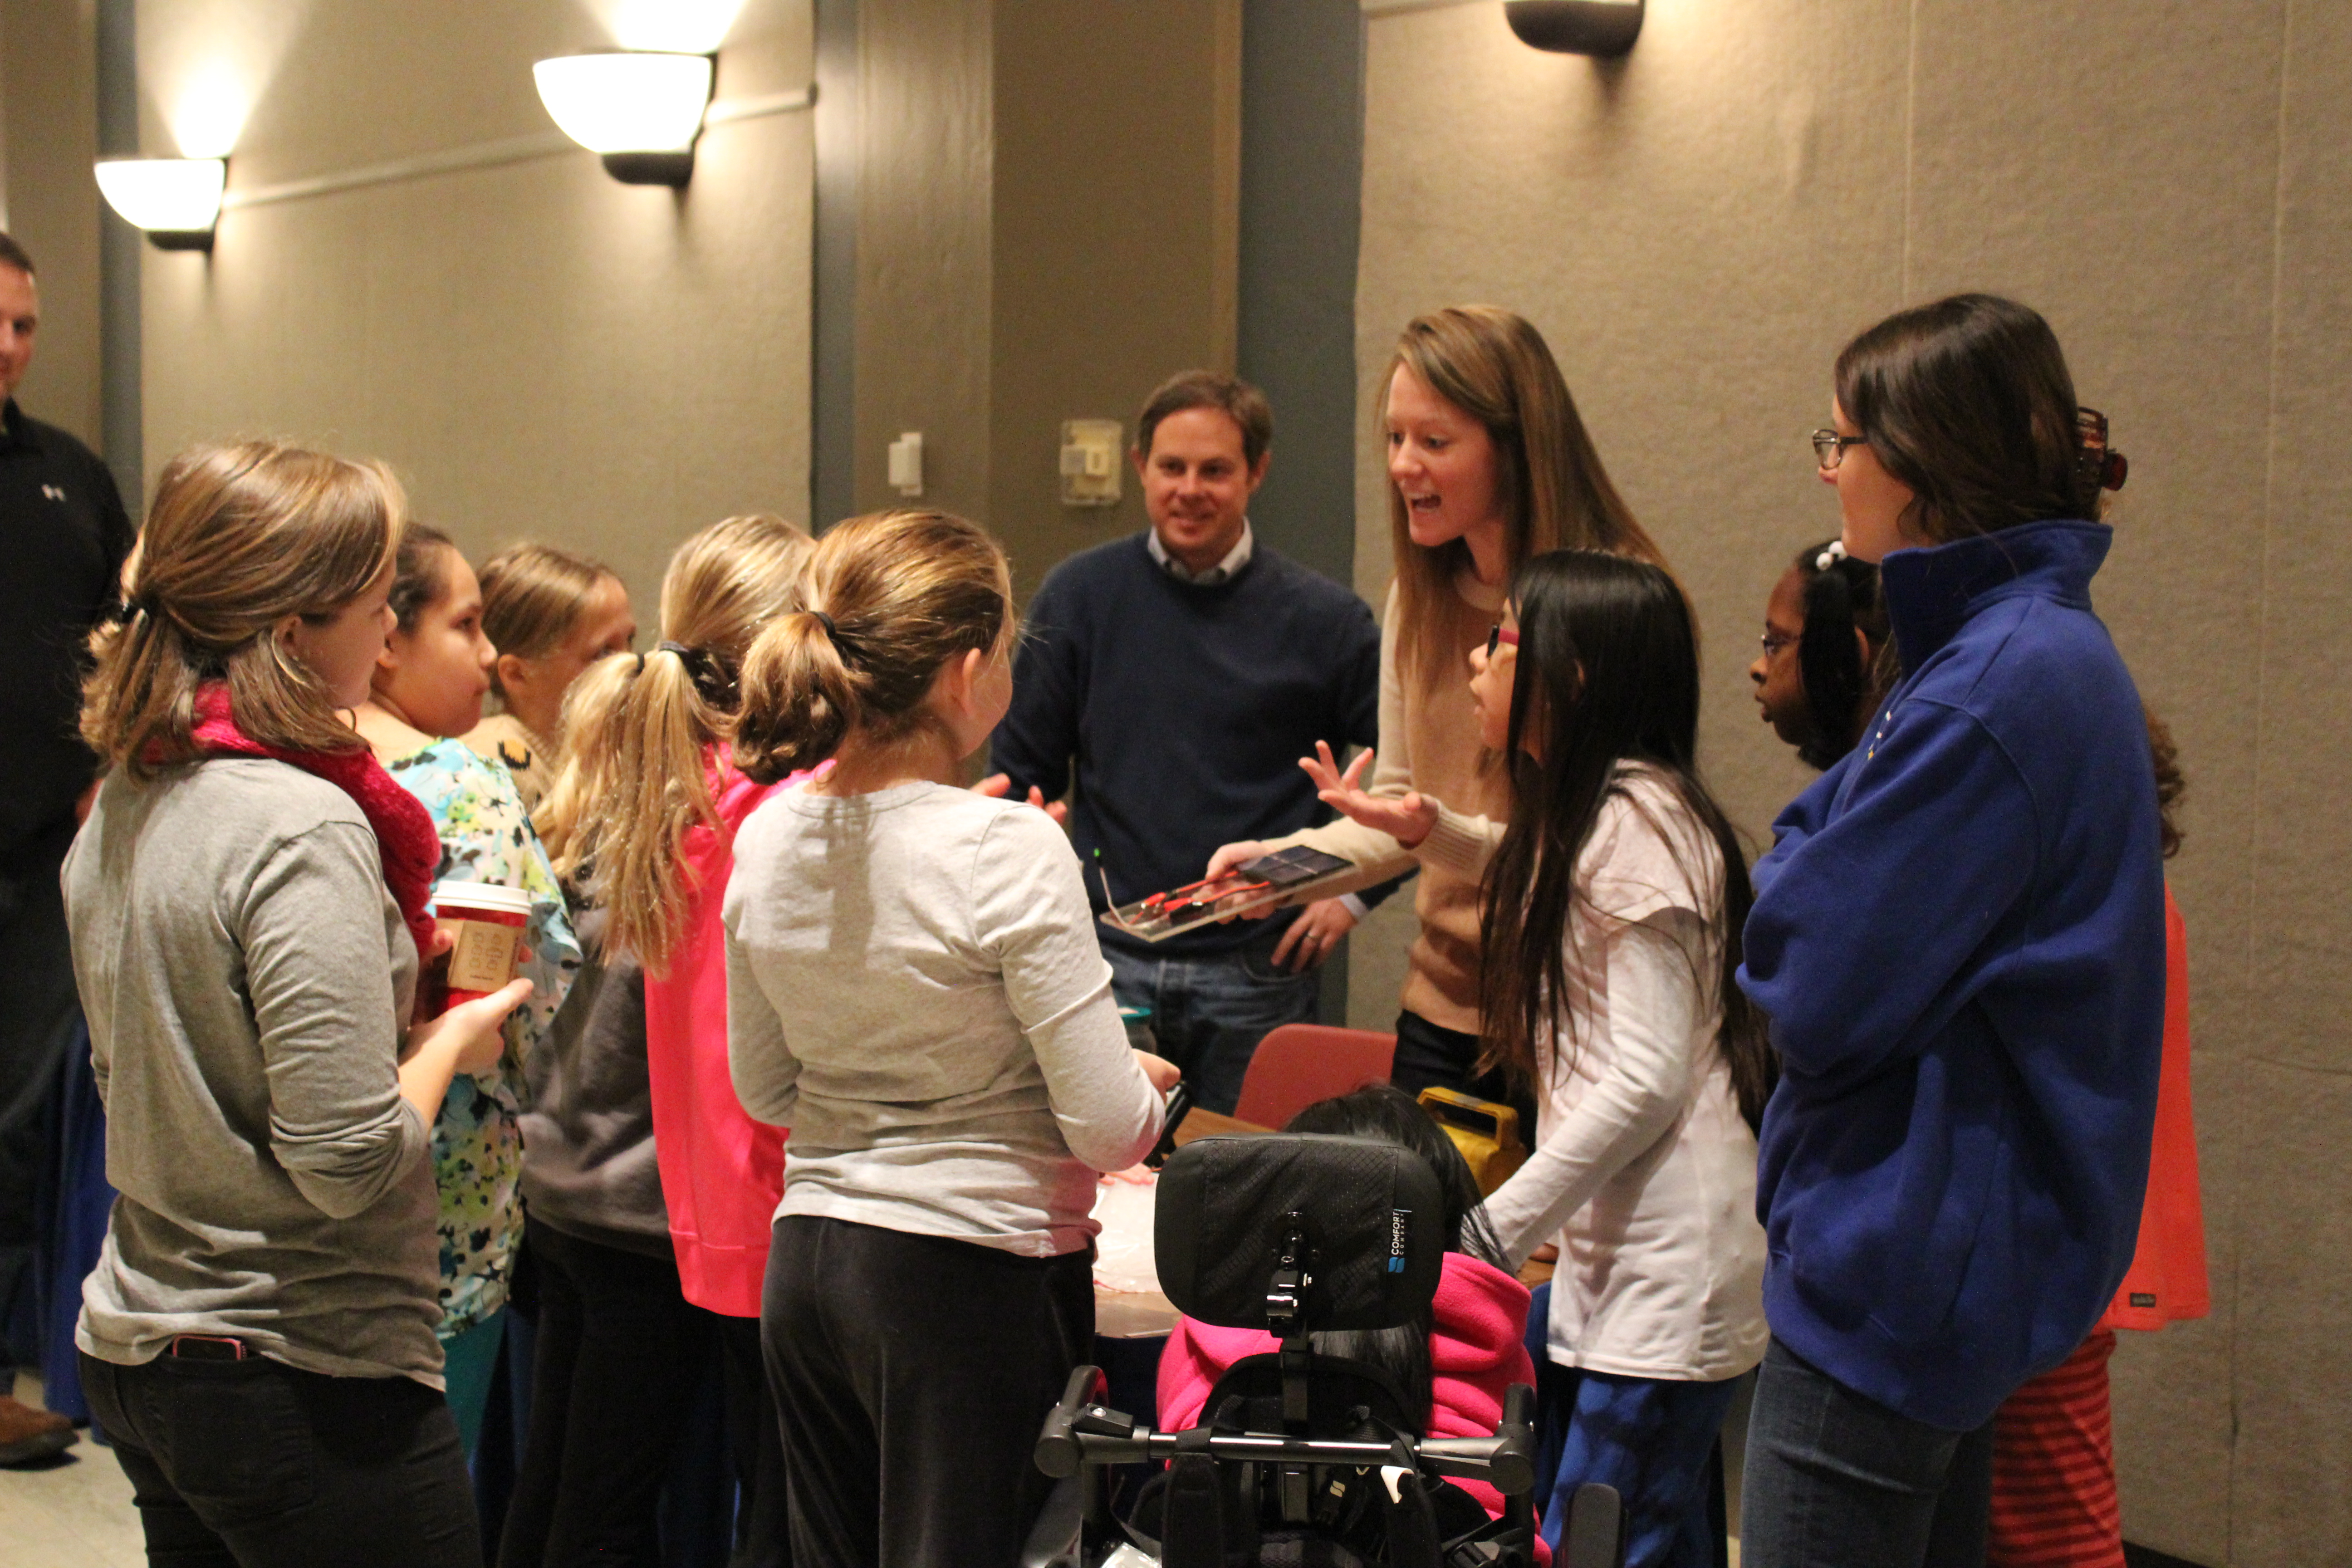 Ashley Morris, a senior research engineer at UK CAER, does a demonstration for fourth and fifth grade students at the Energy Fair Dec. 9 in the UK Student Center Grand Ballroom.